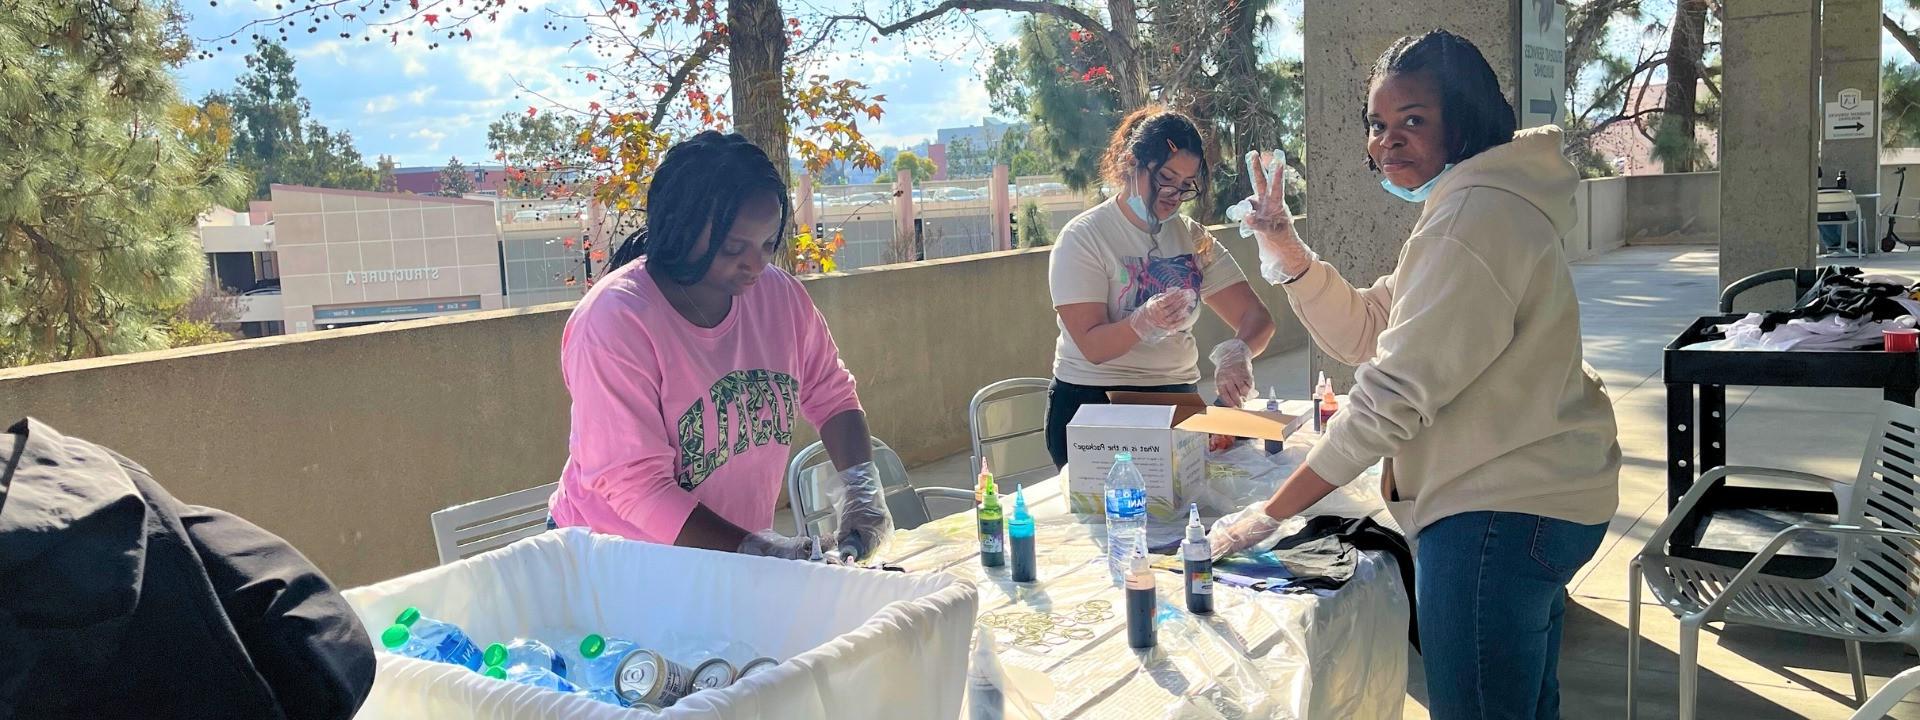 Three students smiling and creating a tie-dye shirt.